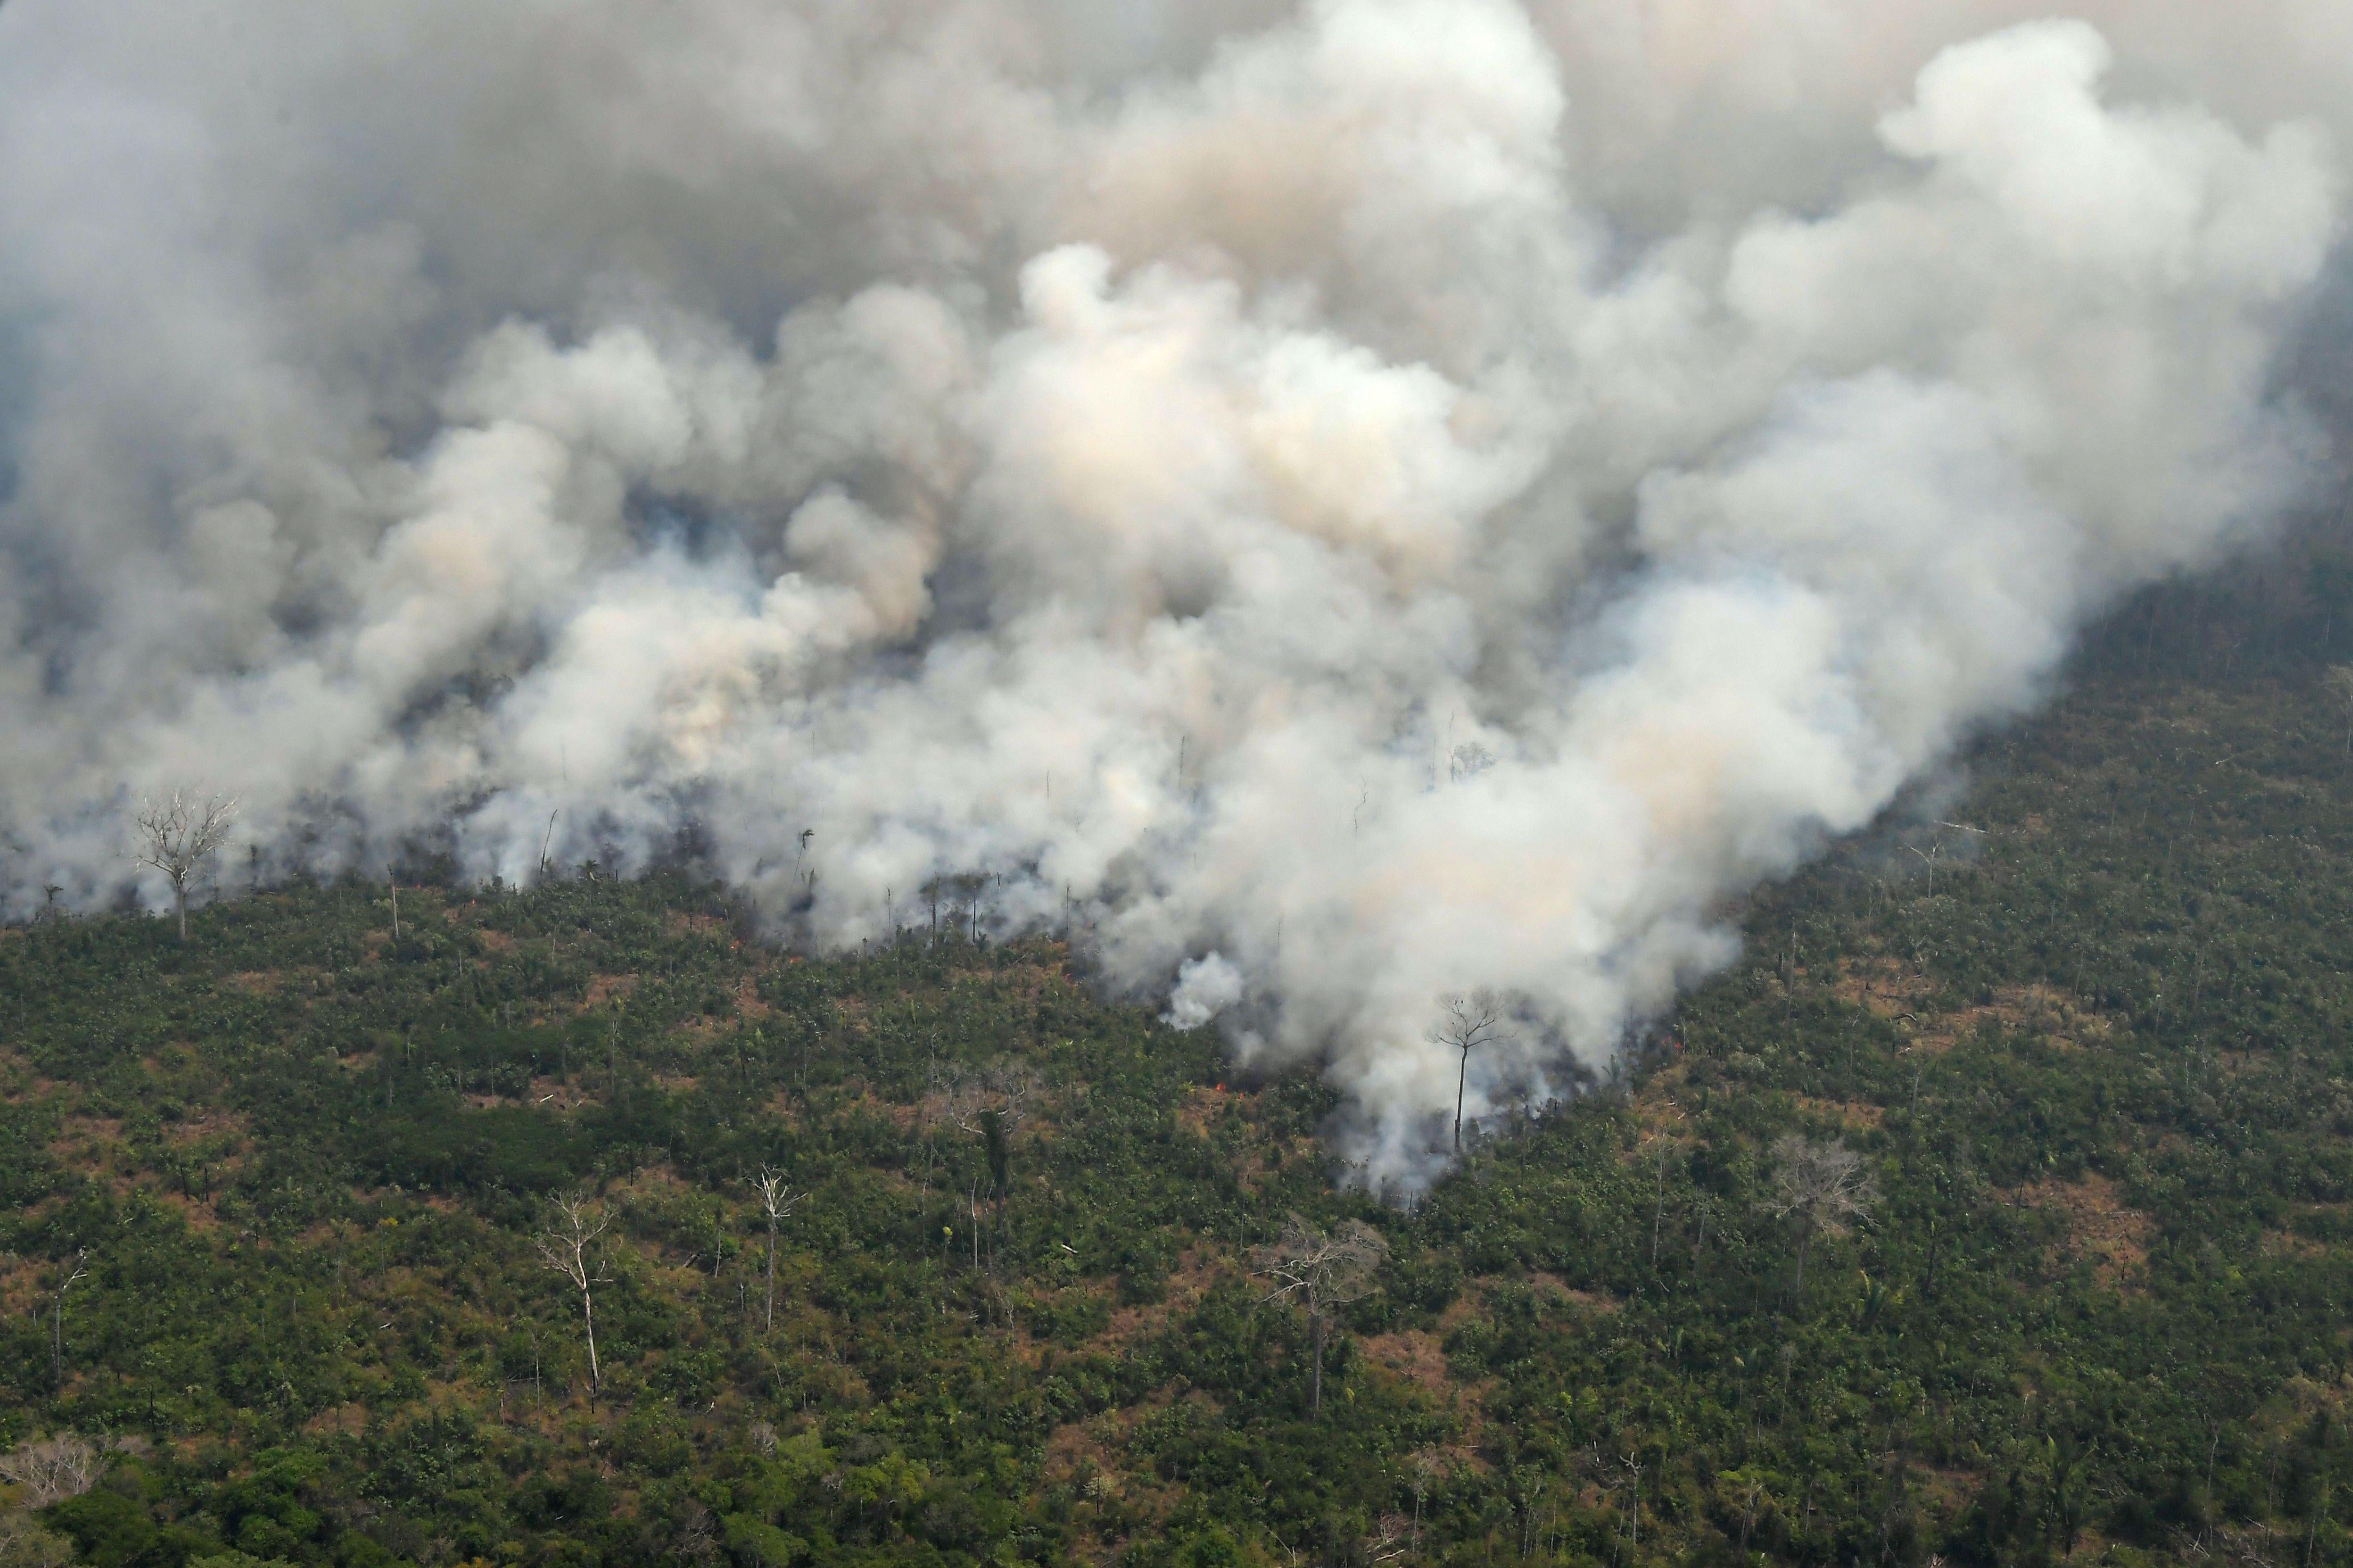 Aerial picture showing smoke from a two-kilometre-long stretch of fire billowing from the Amazon rainforest about 65 km from Porto Velho, in the state of Rondonia, in northern Brazil, on August 23, 2019.